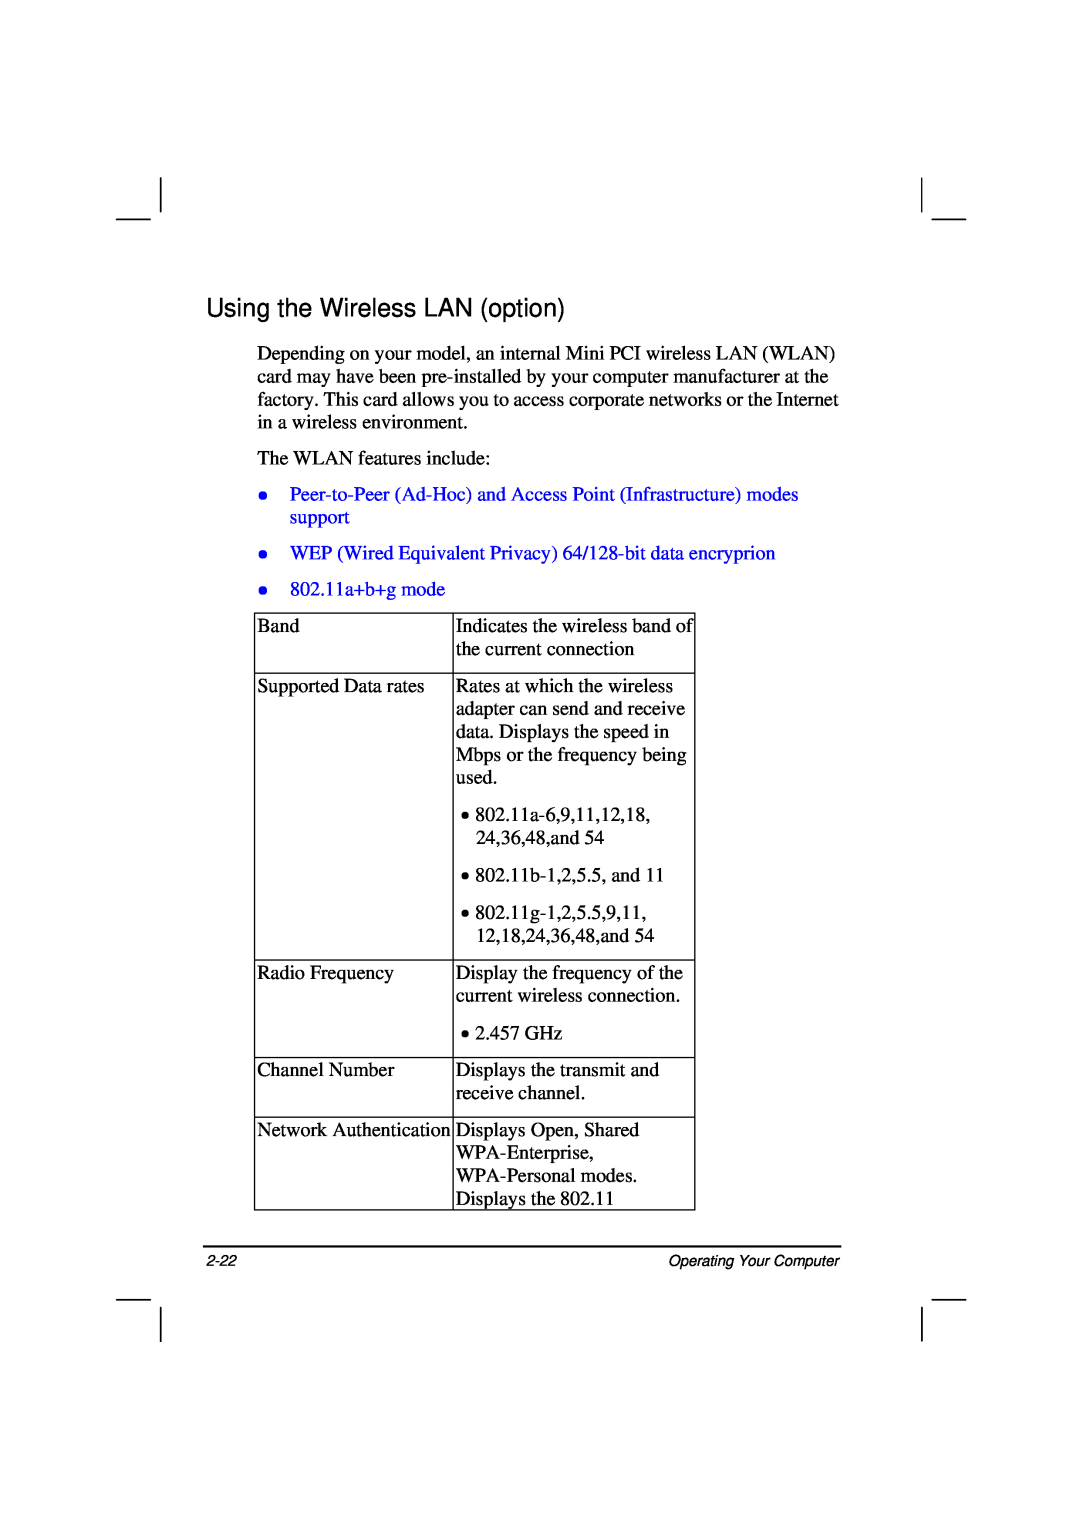 Casio HK1223 owner manual Using the Wireless LAN option, Peer-to-Peer Ad-Hoc and Access Point Infrastructure modes support 